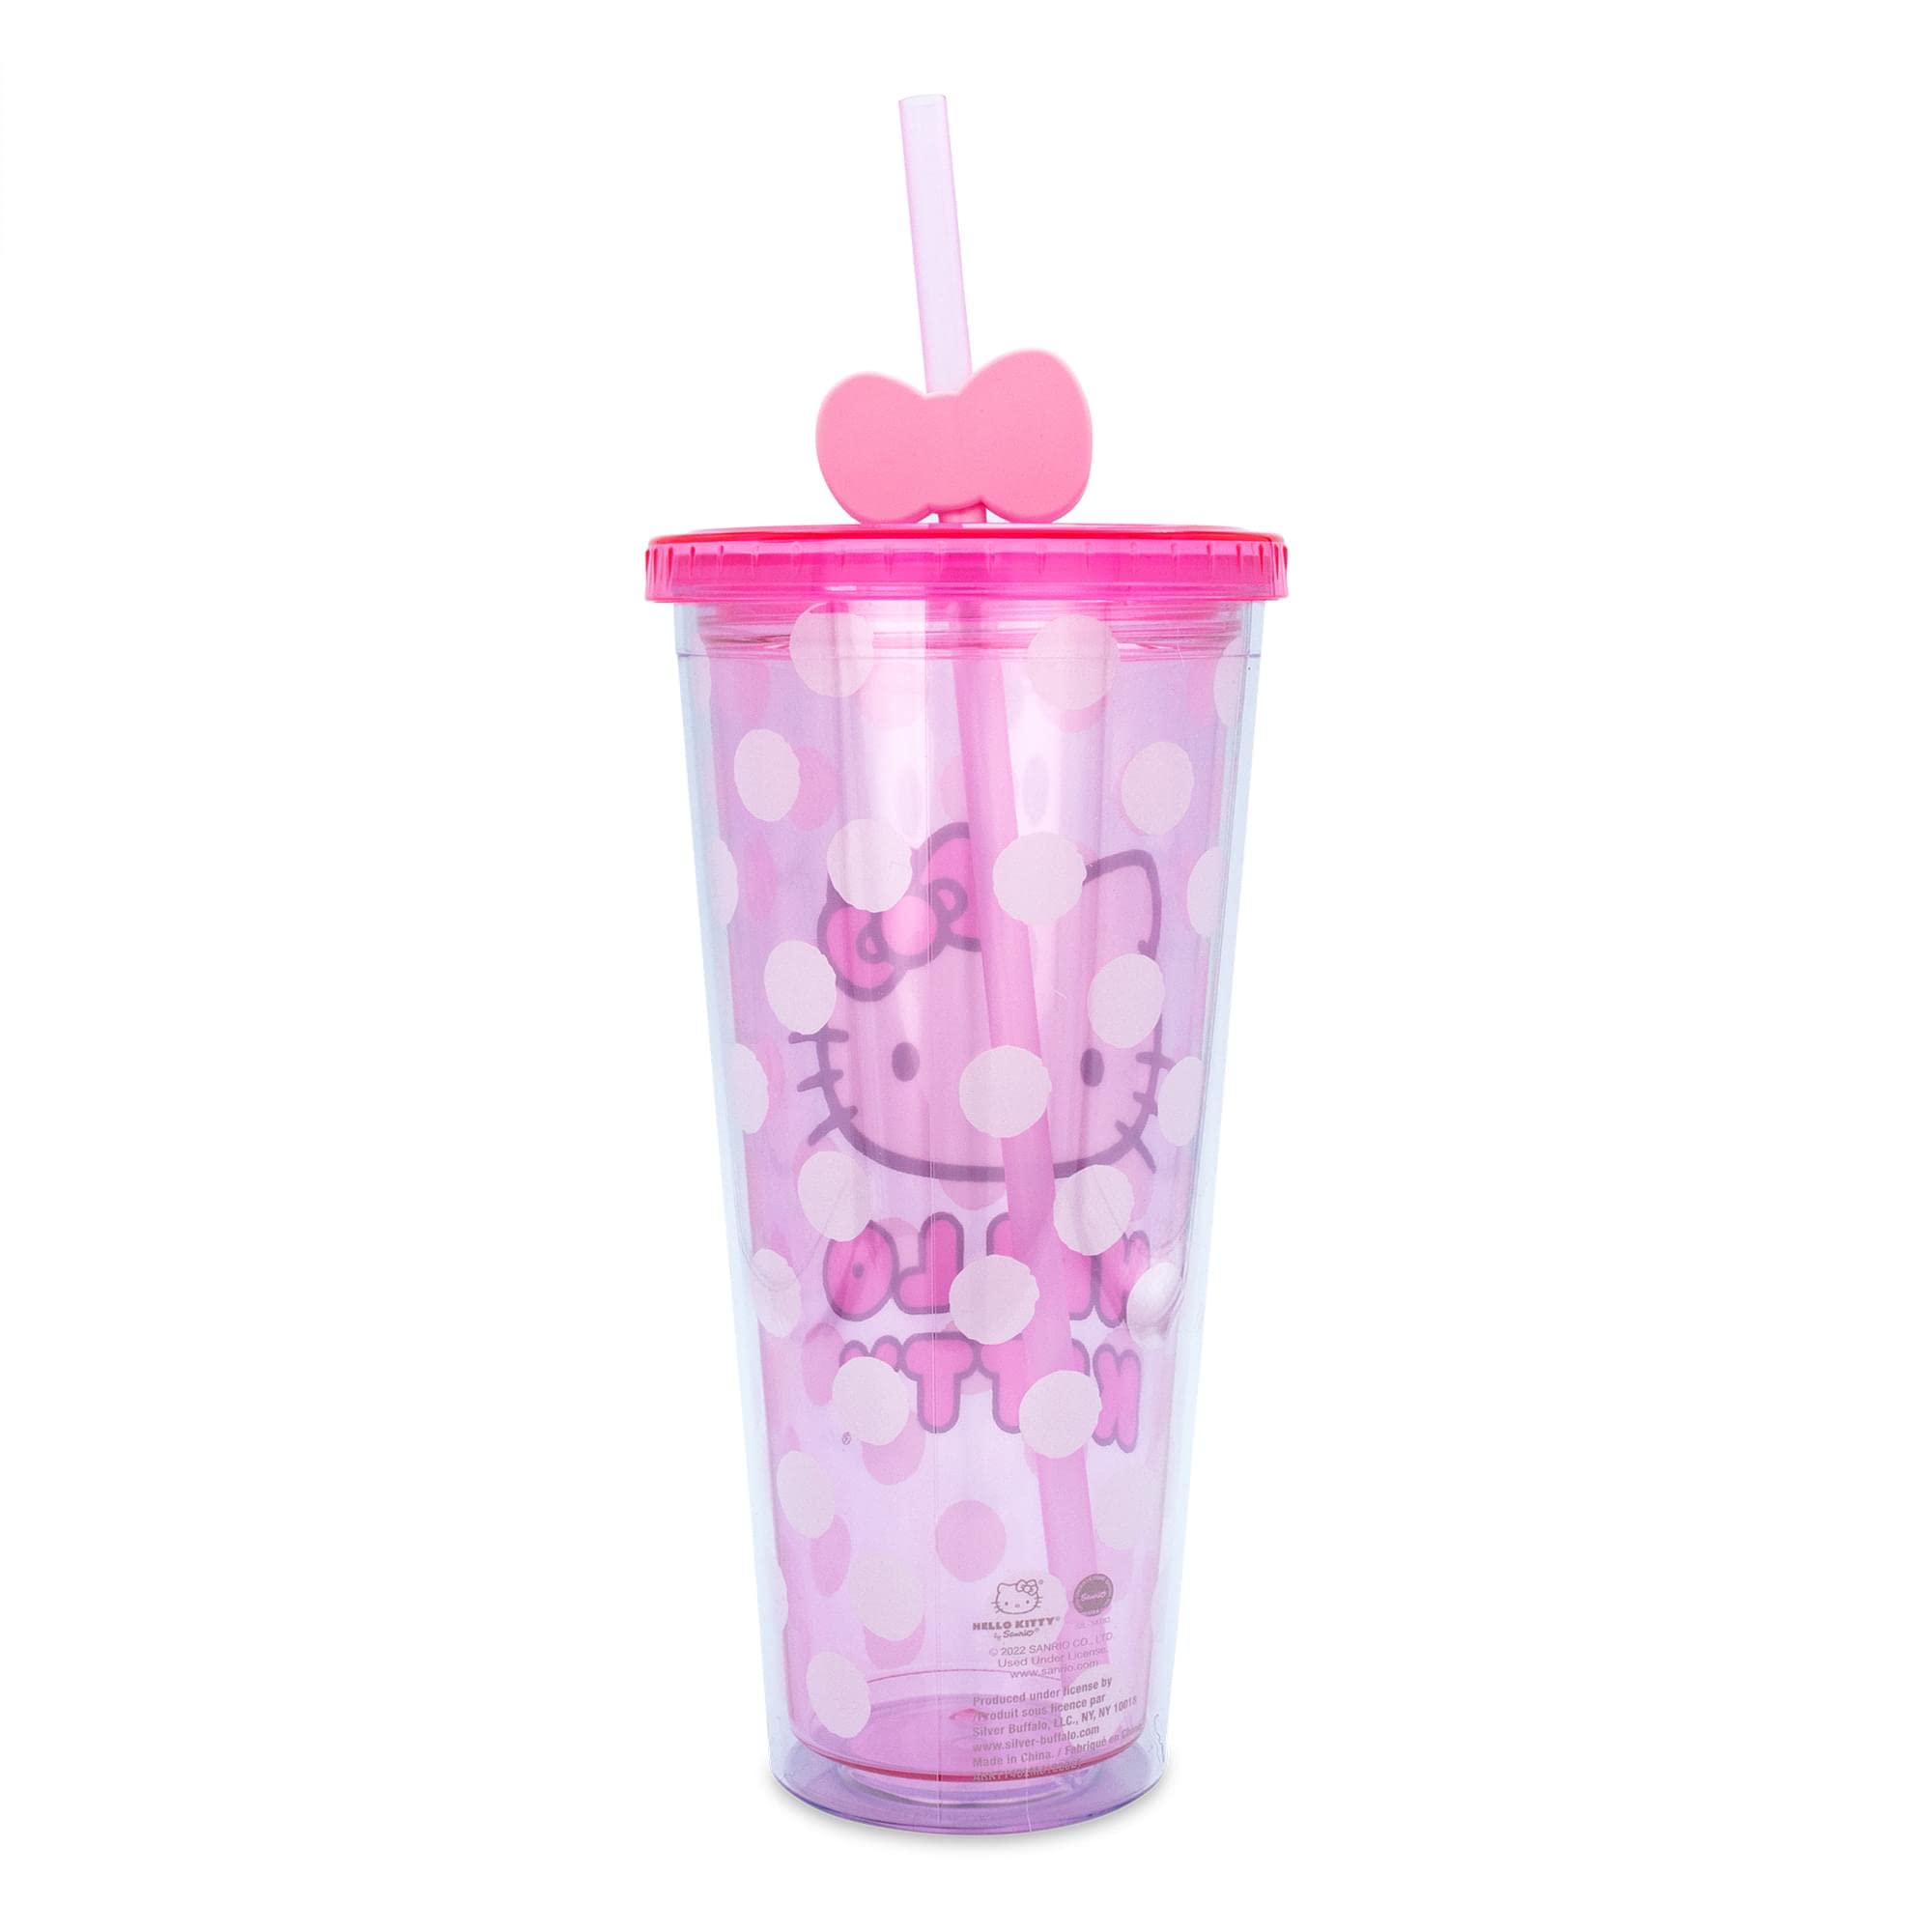 Silver Buffalo Sanrio Hello Kitty Face Carnival Cup With Lid and Topper Straw | Holds 24 Ounces